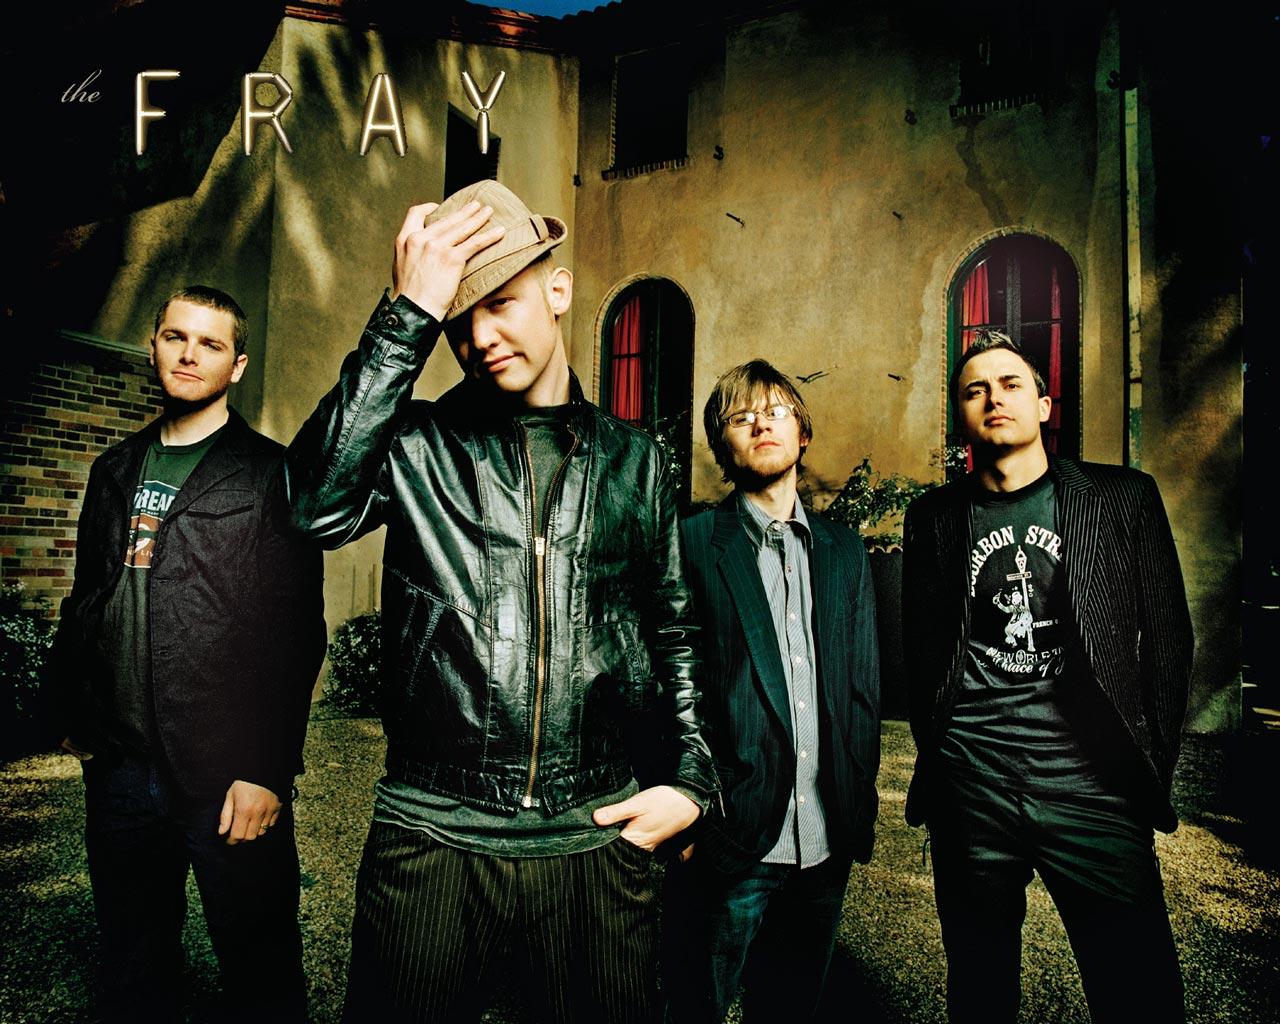 The Fray Wallpaper #3 1280 x 1024 